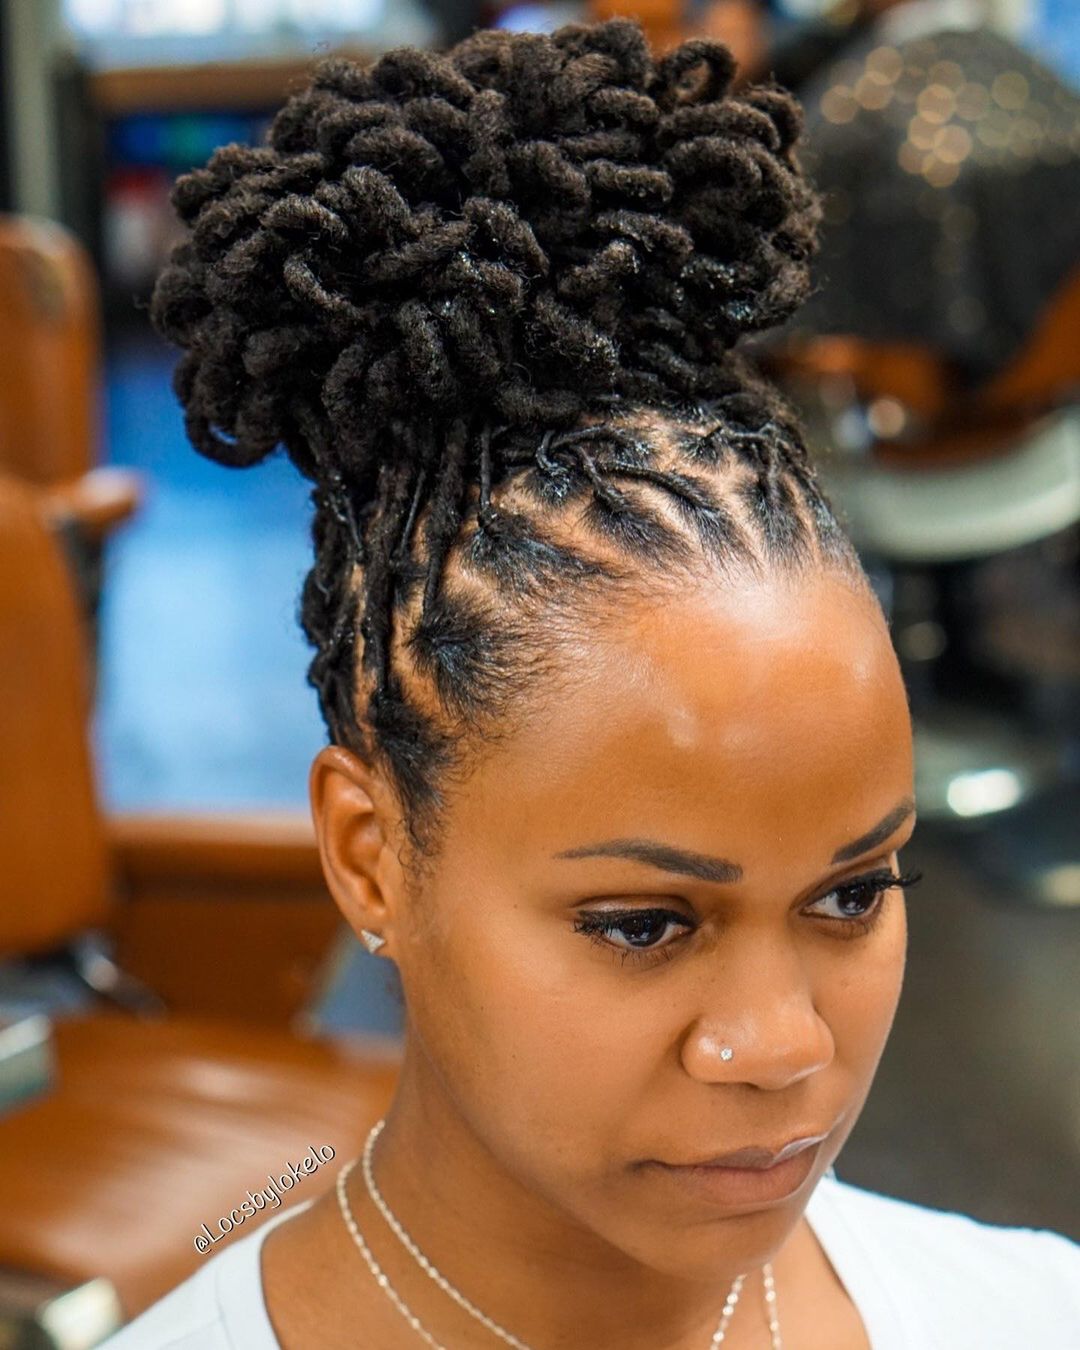 40 Updo Hairstyles for Black Women to Try in 2023 - Hair Adviser